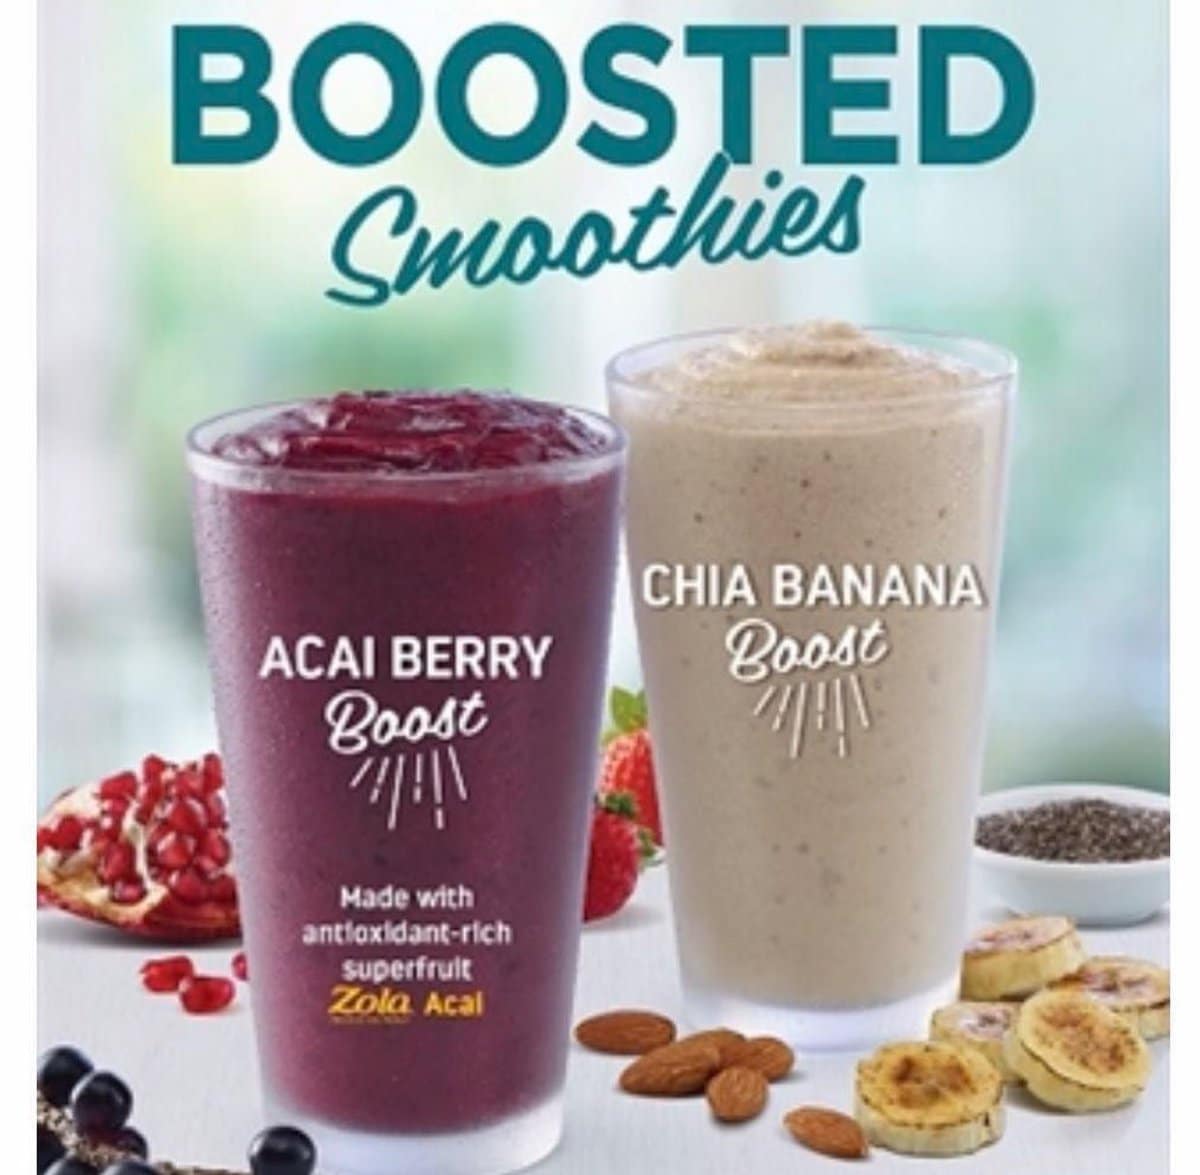 Is The Chia Banana Boost Smoothie Good For You